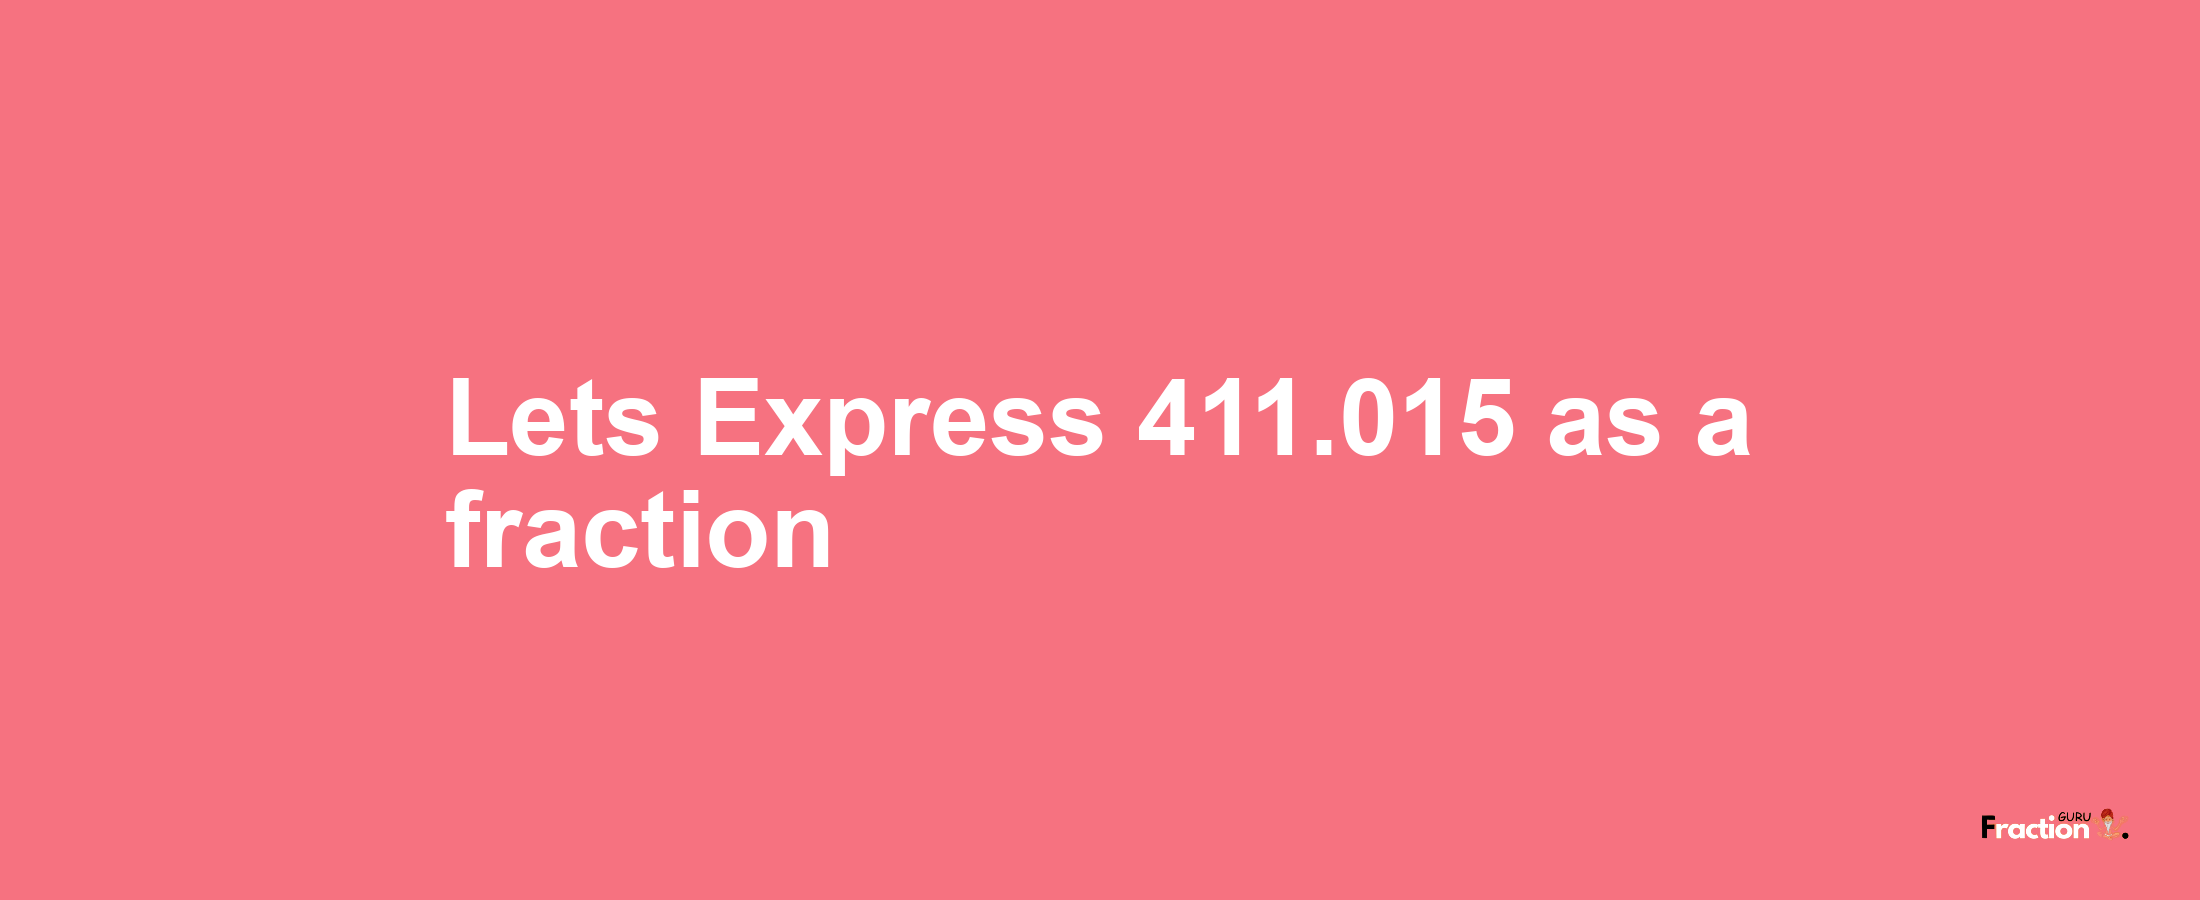 Lets Express 411.015 as afraction